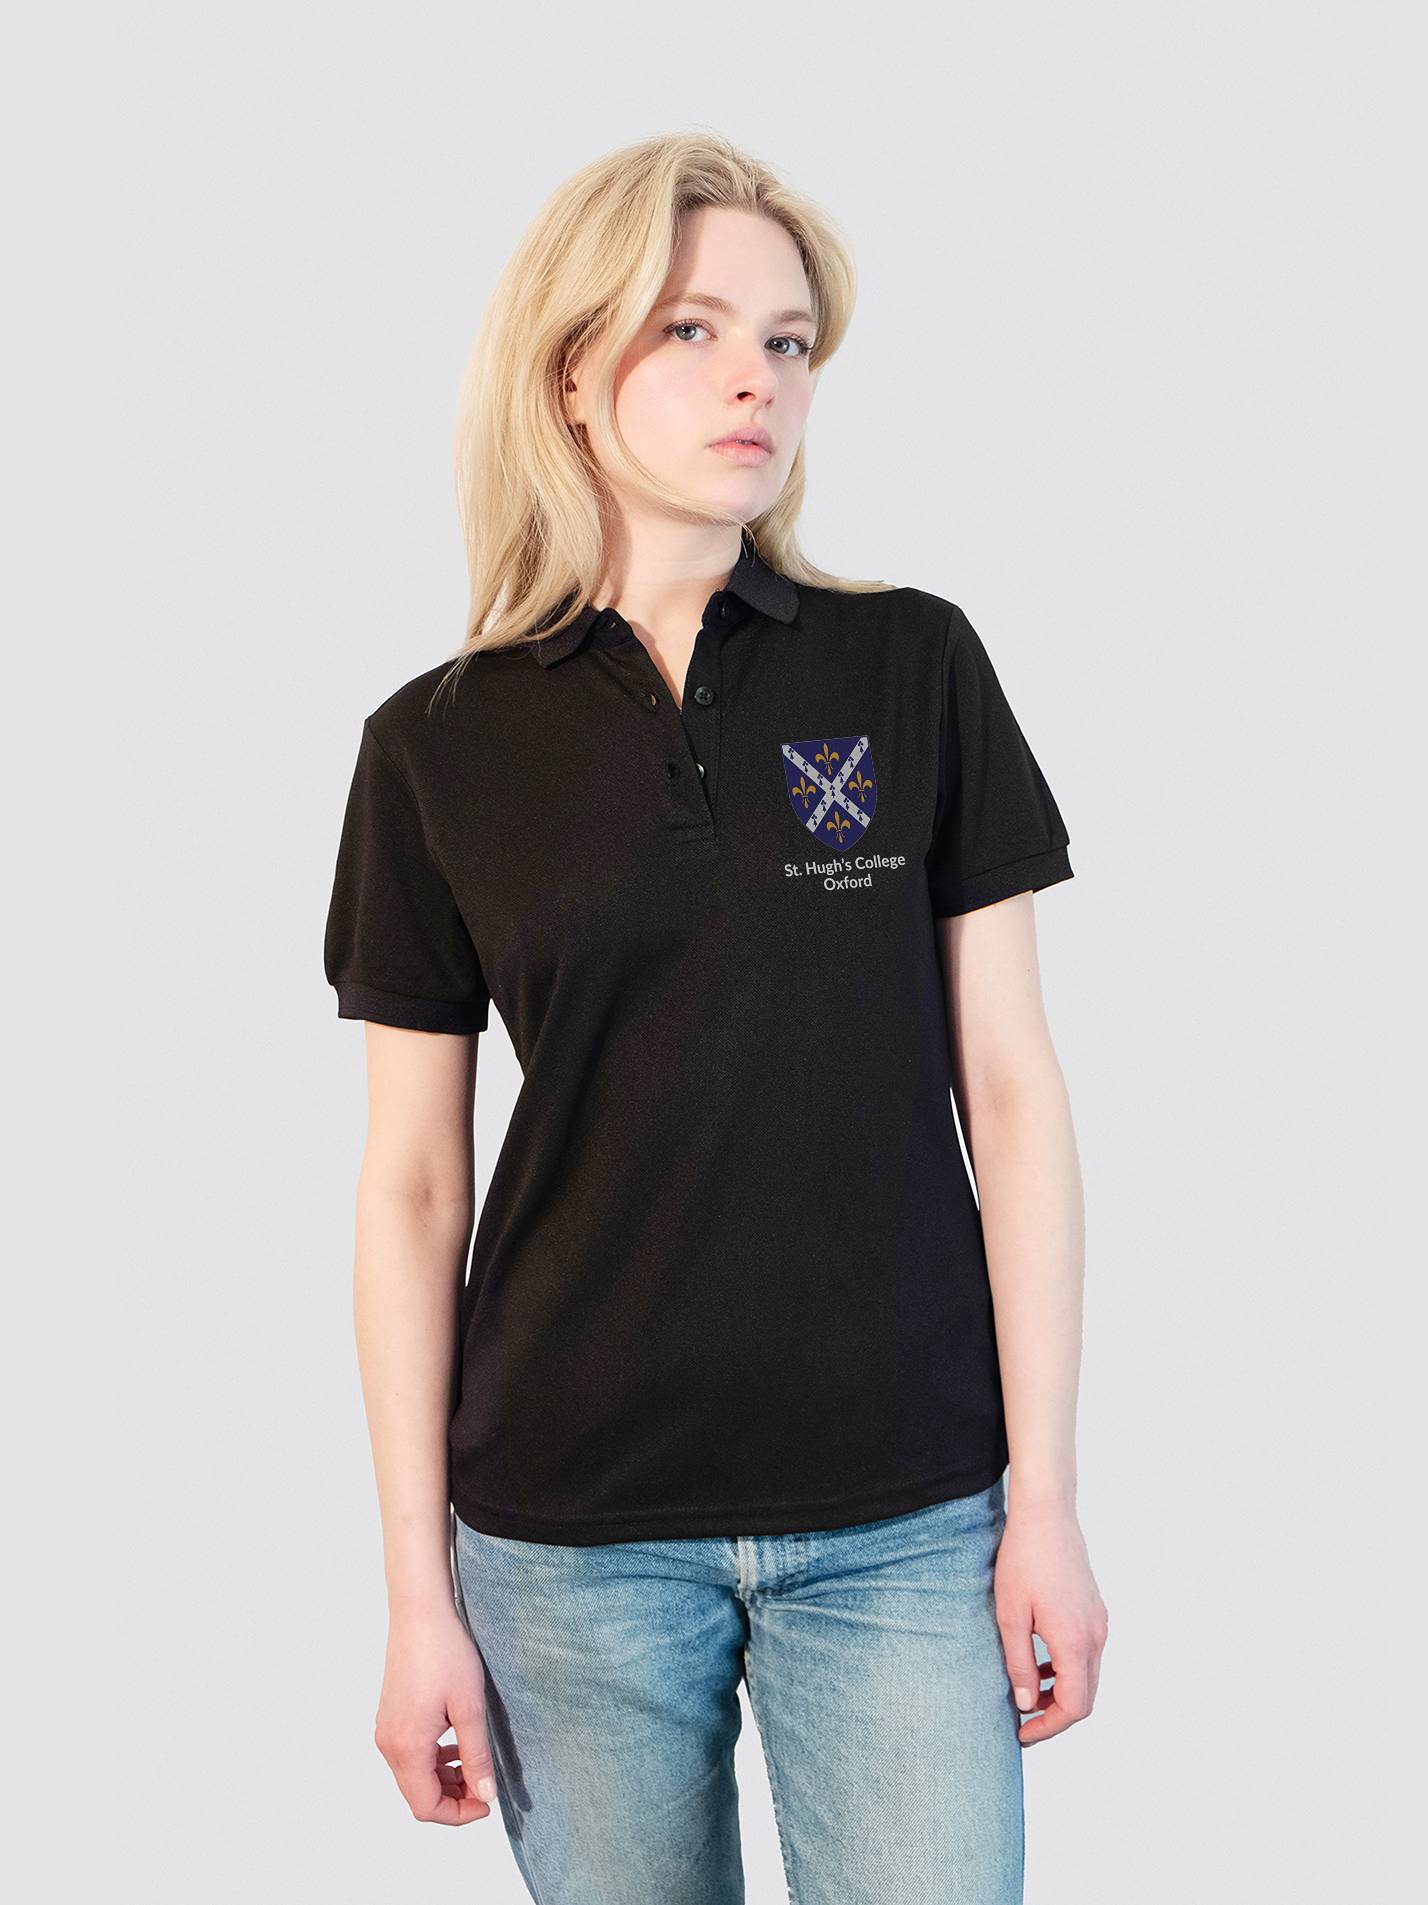 St Hugh's College Oxford Sustainable Ladies Polo Shirt